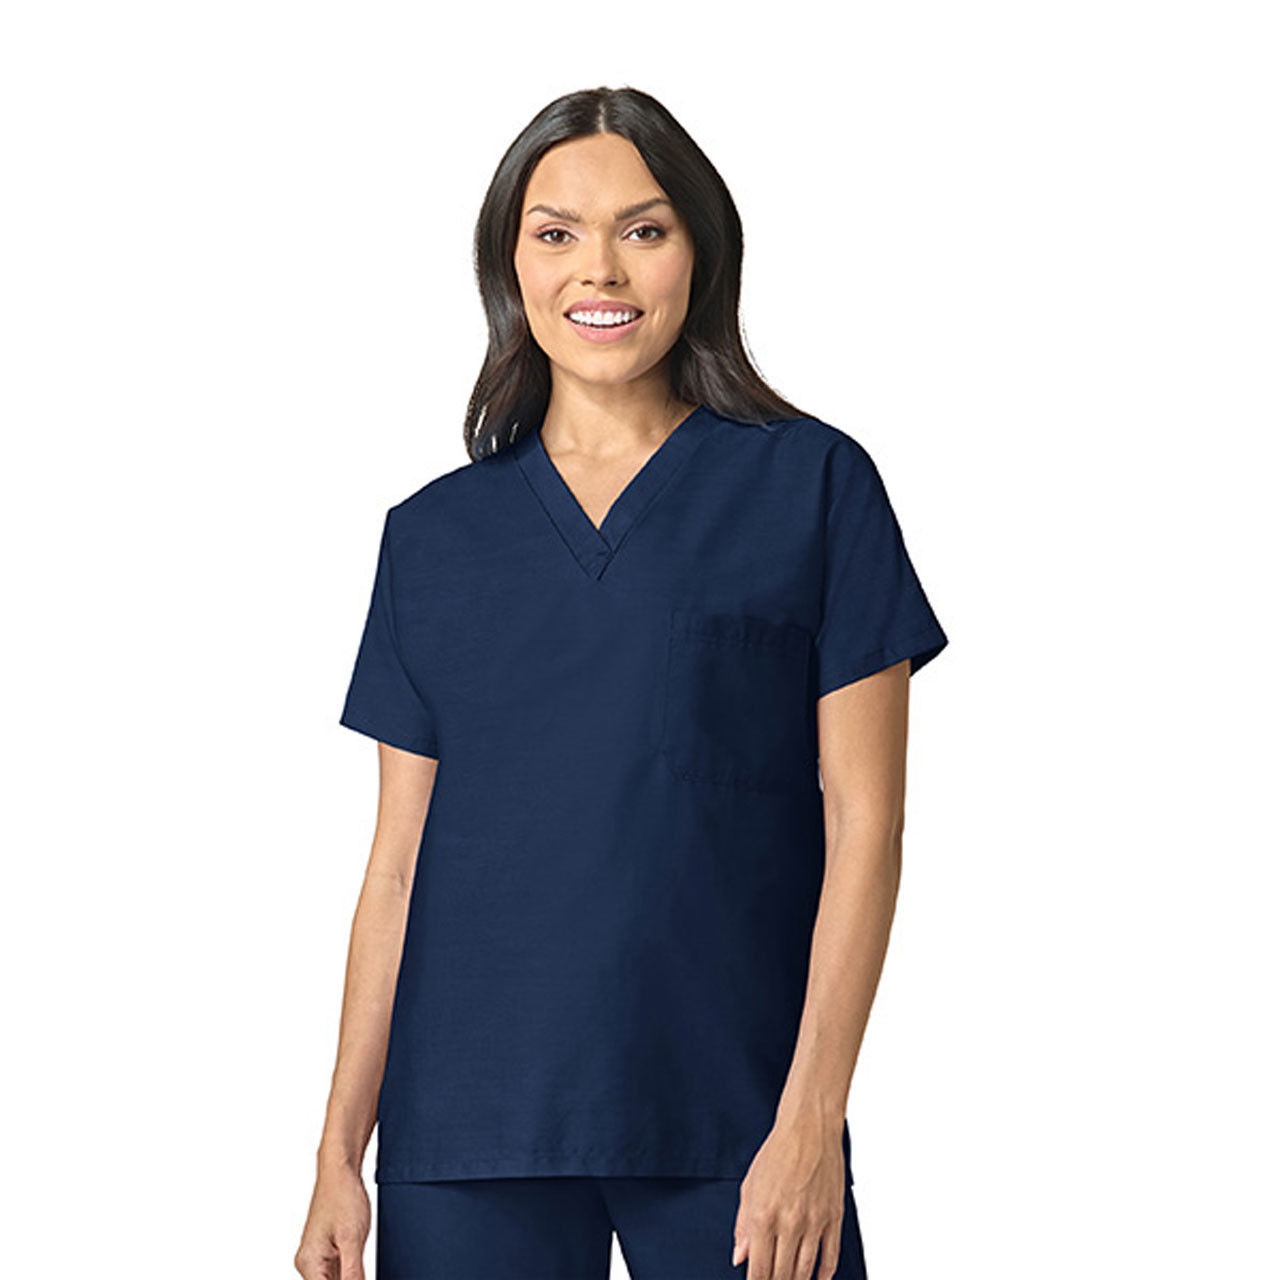 Where can the V Neck Scrub Top be used?